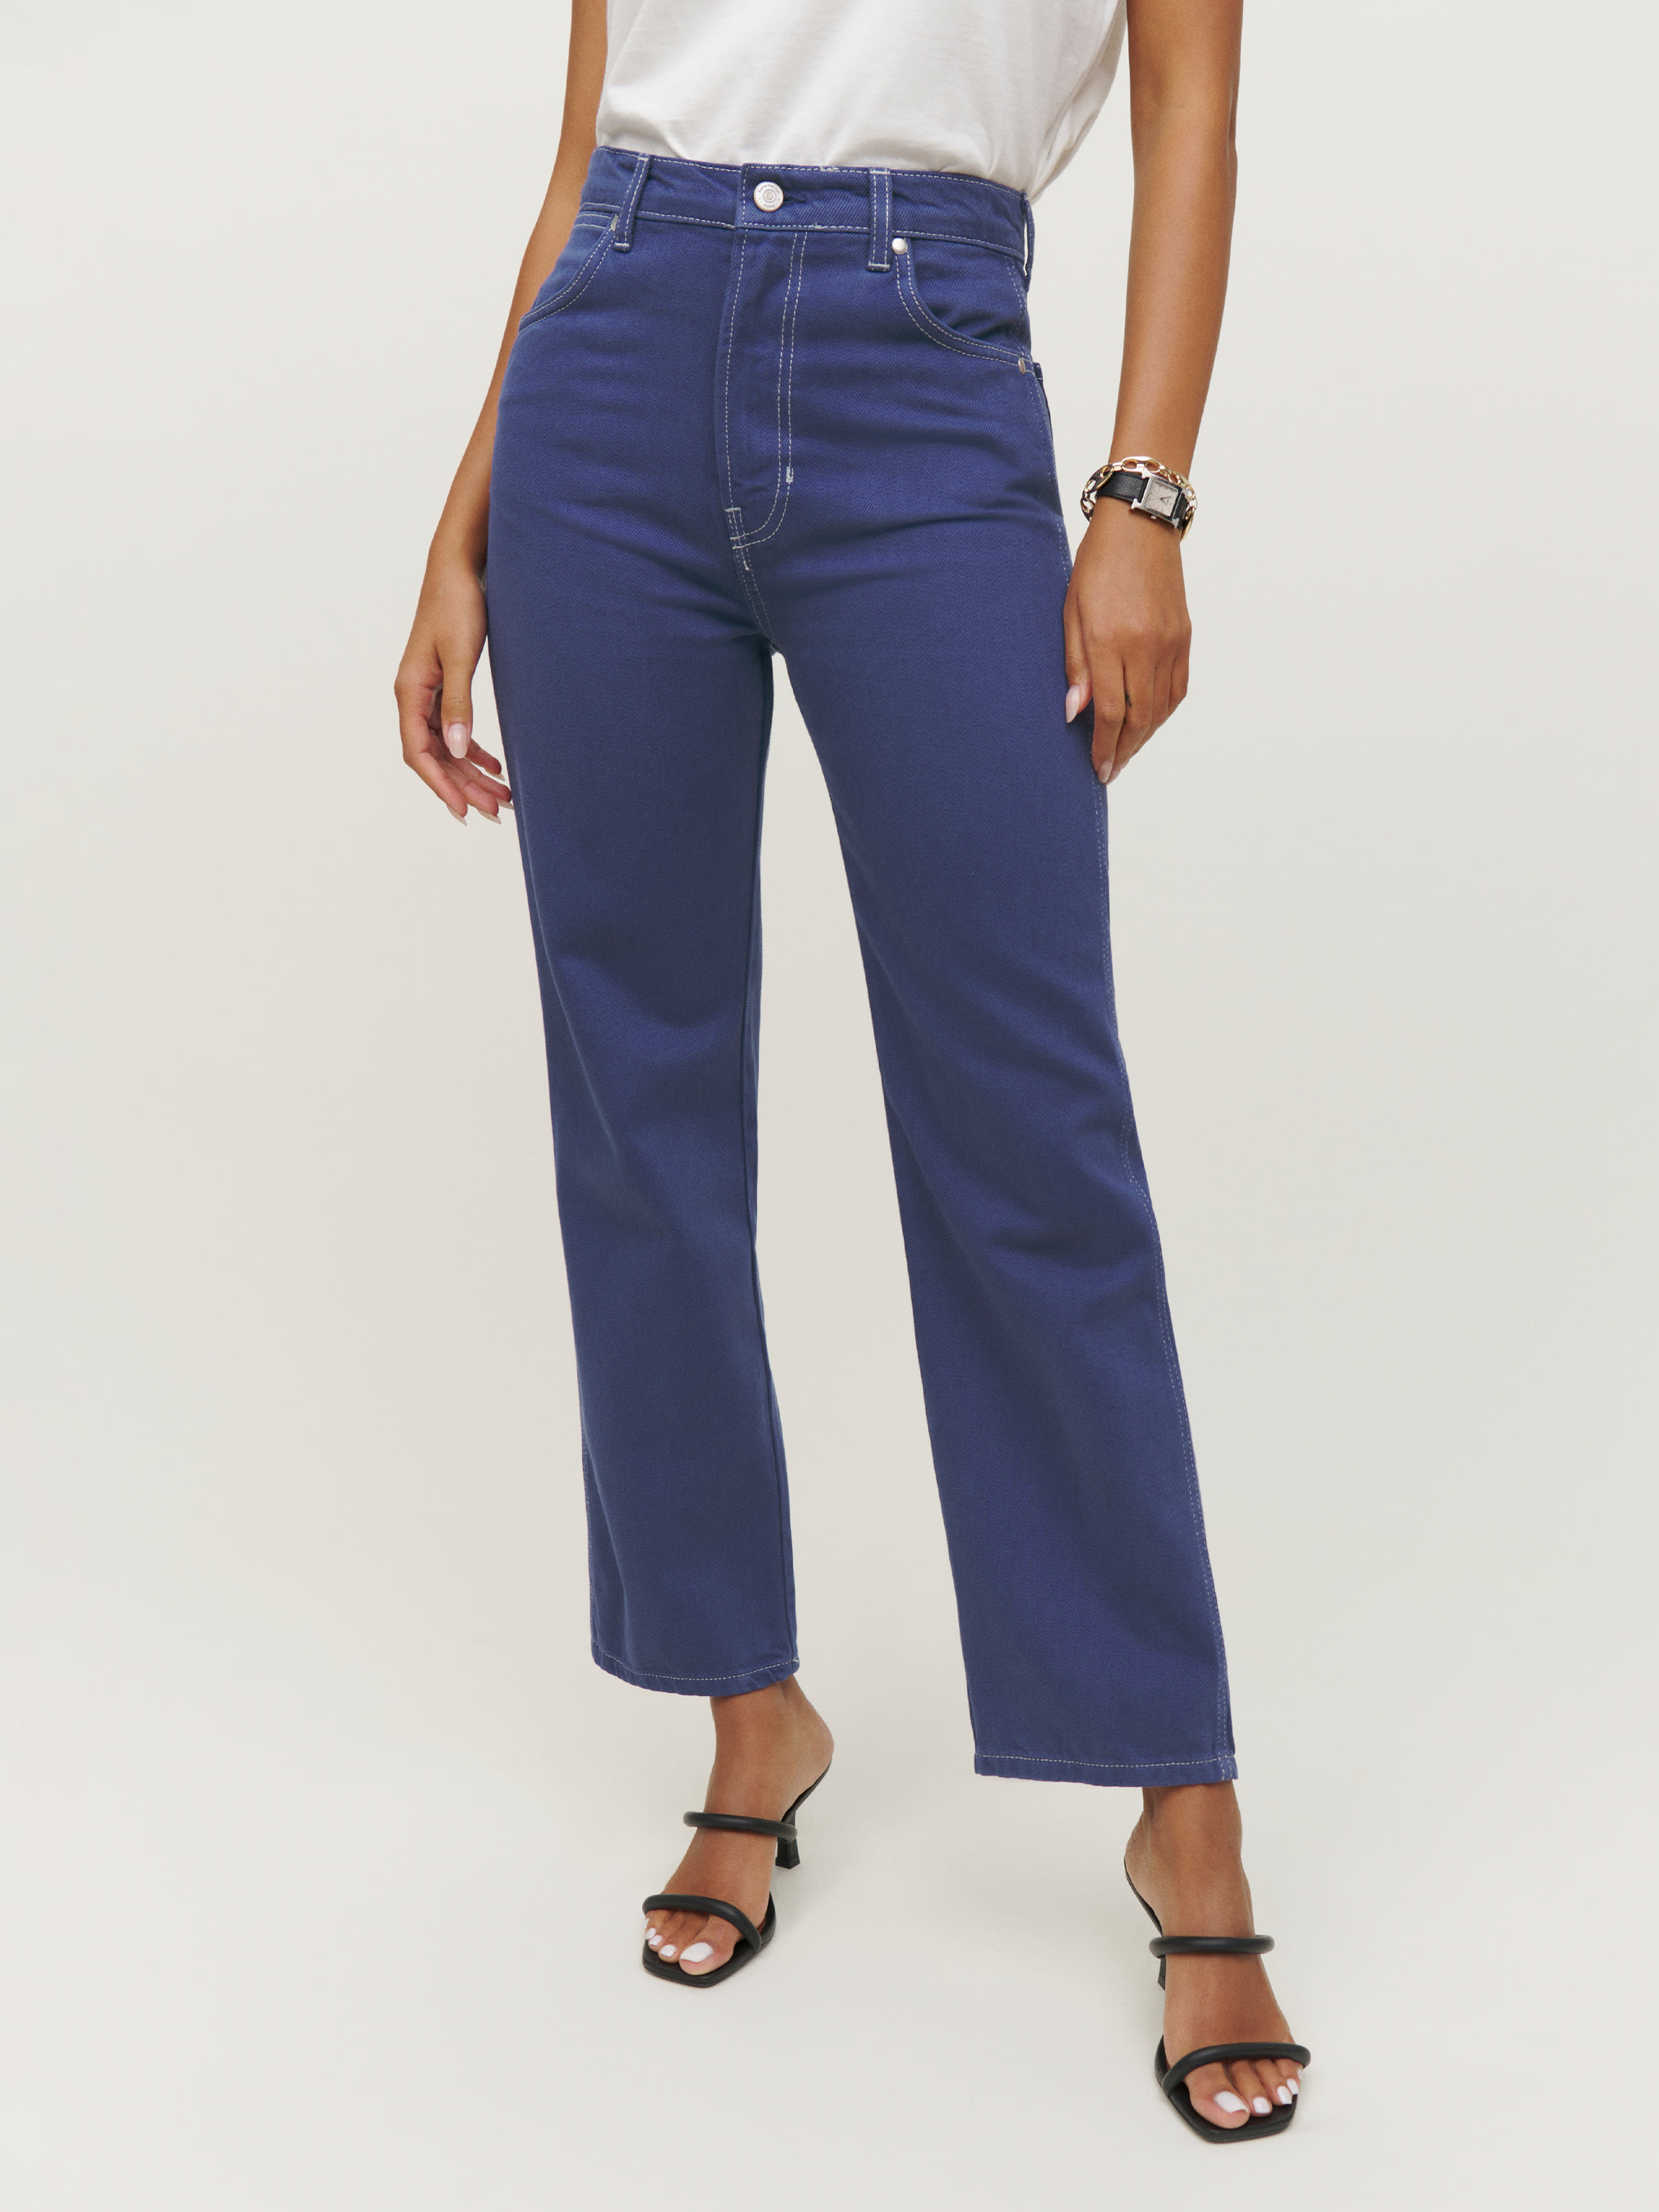 Cowboy High Rise Straight Jeans, thumbnail image 1